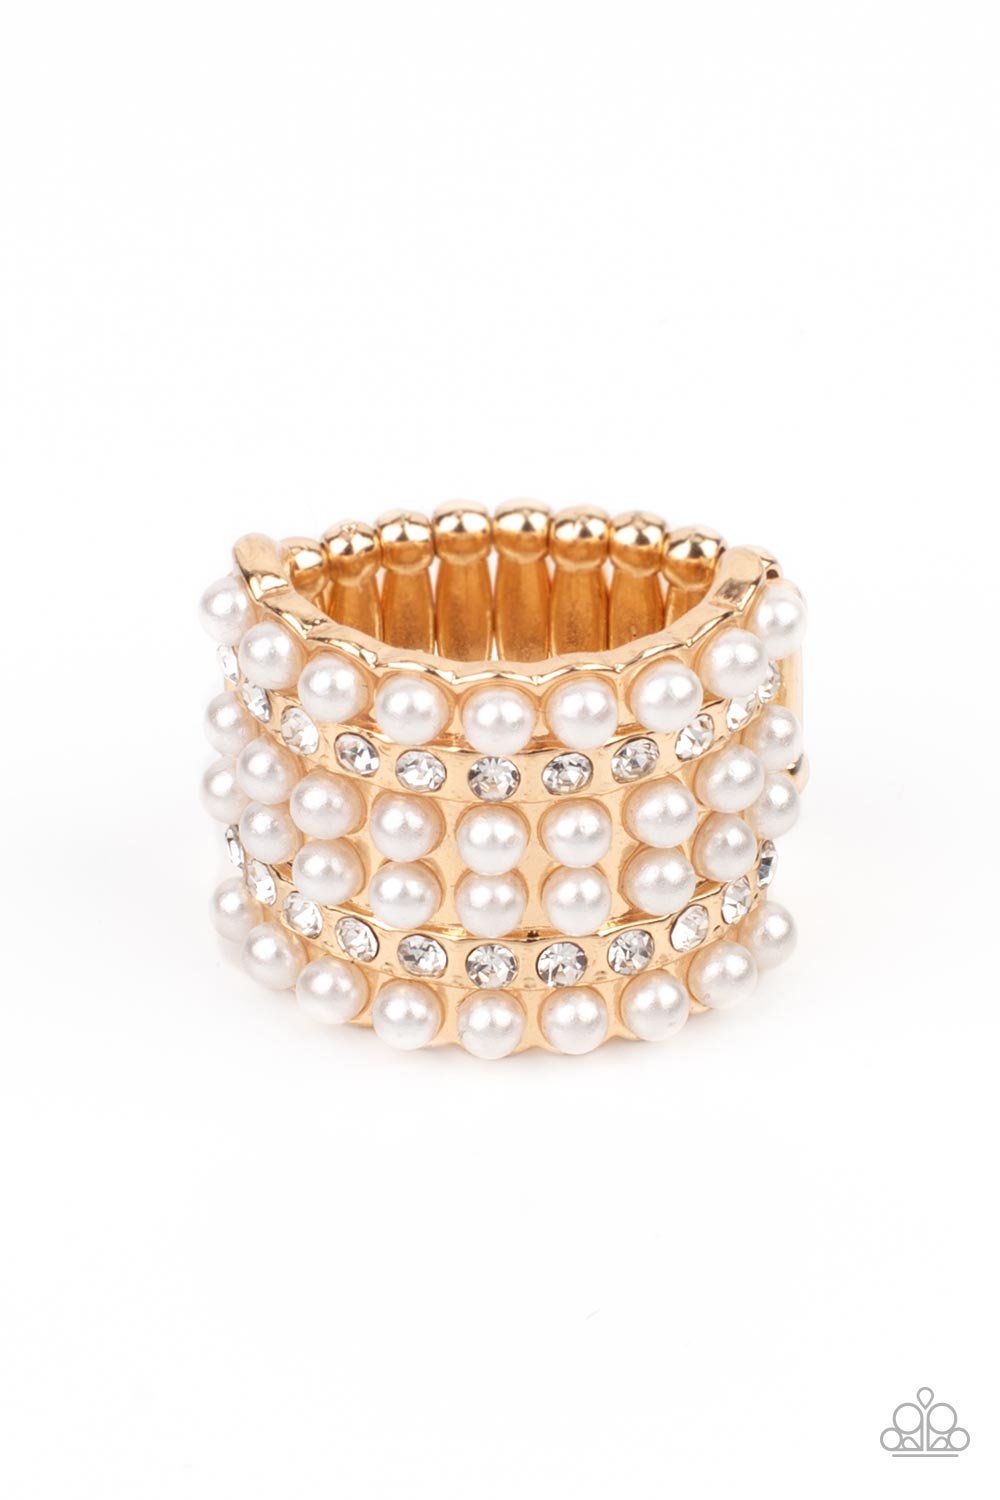 Verified Vintage Gold Ring - Paparazzi Accessories  Dainty rows of bubbly pearls and glassy white rhinestones alternate across the front of a thick gold band, creating a vintage inspired statement piece. Features a stretchy band for a flexible fit.  All Paparazzi Accessories are lead free and nickel free!  Sold as one individual ring.